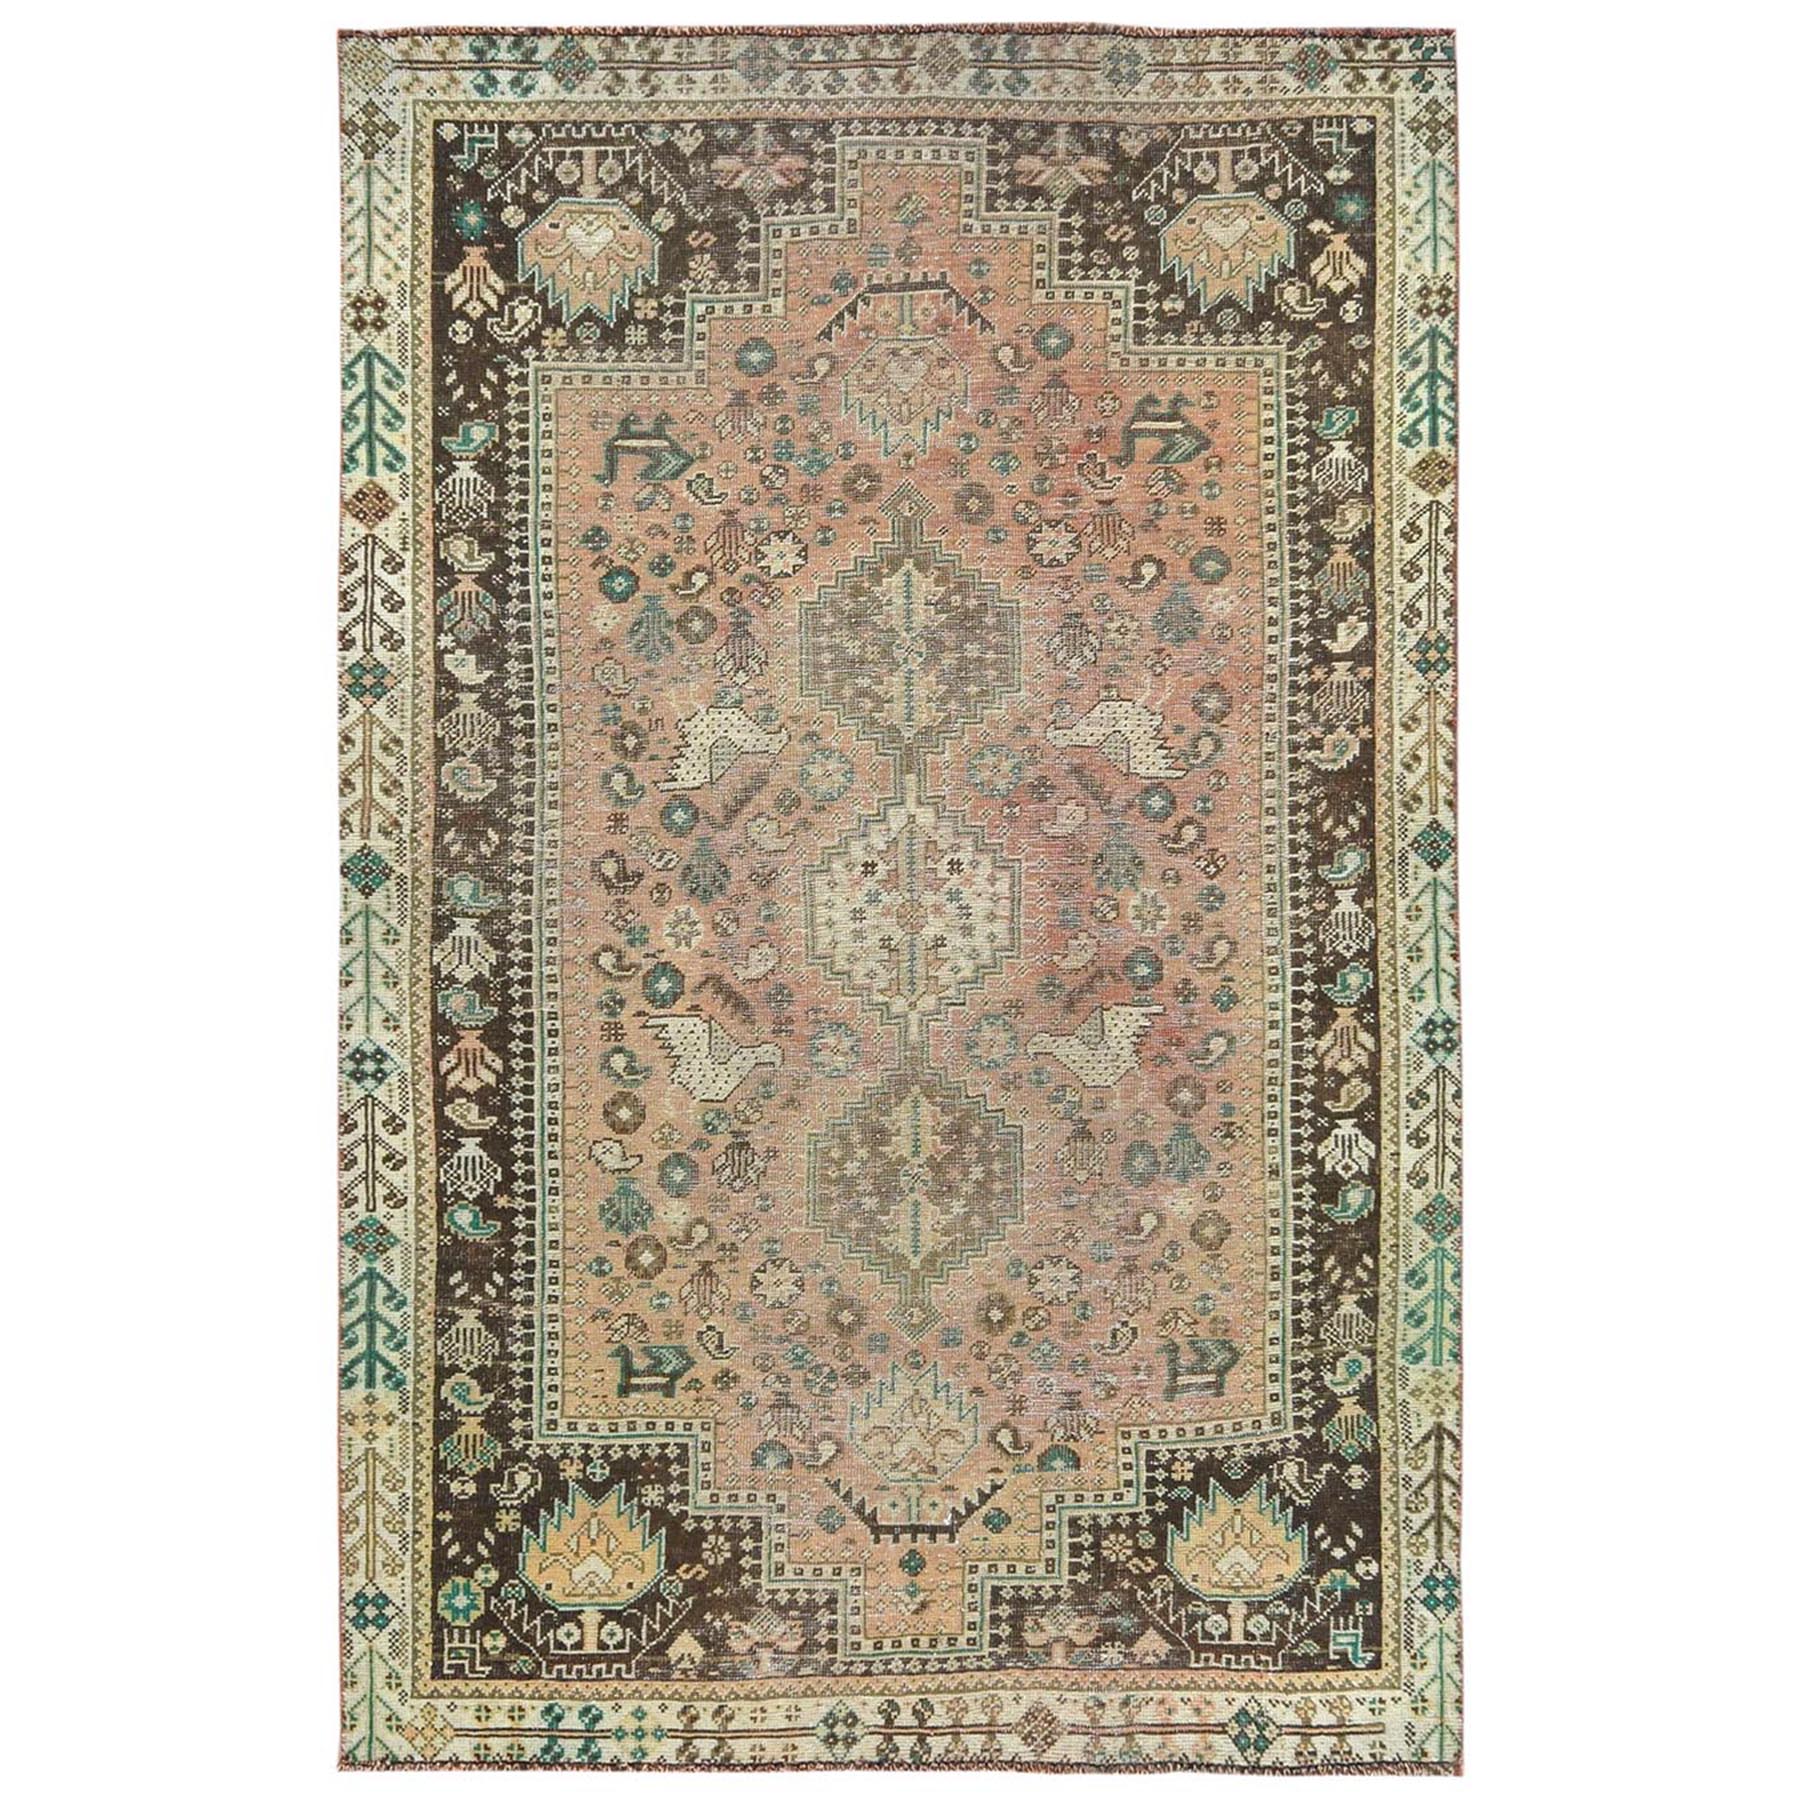 4'7"x7'2" Light Red, Sheared Low Vintage Persian Qashqai with Peacock Design and Multi Borders, Hand Woven Pure Wool, Distressed Look Oriental Rug 